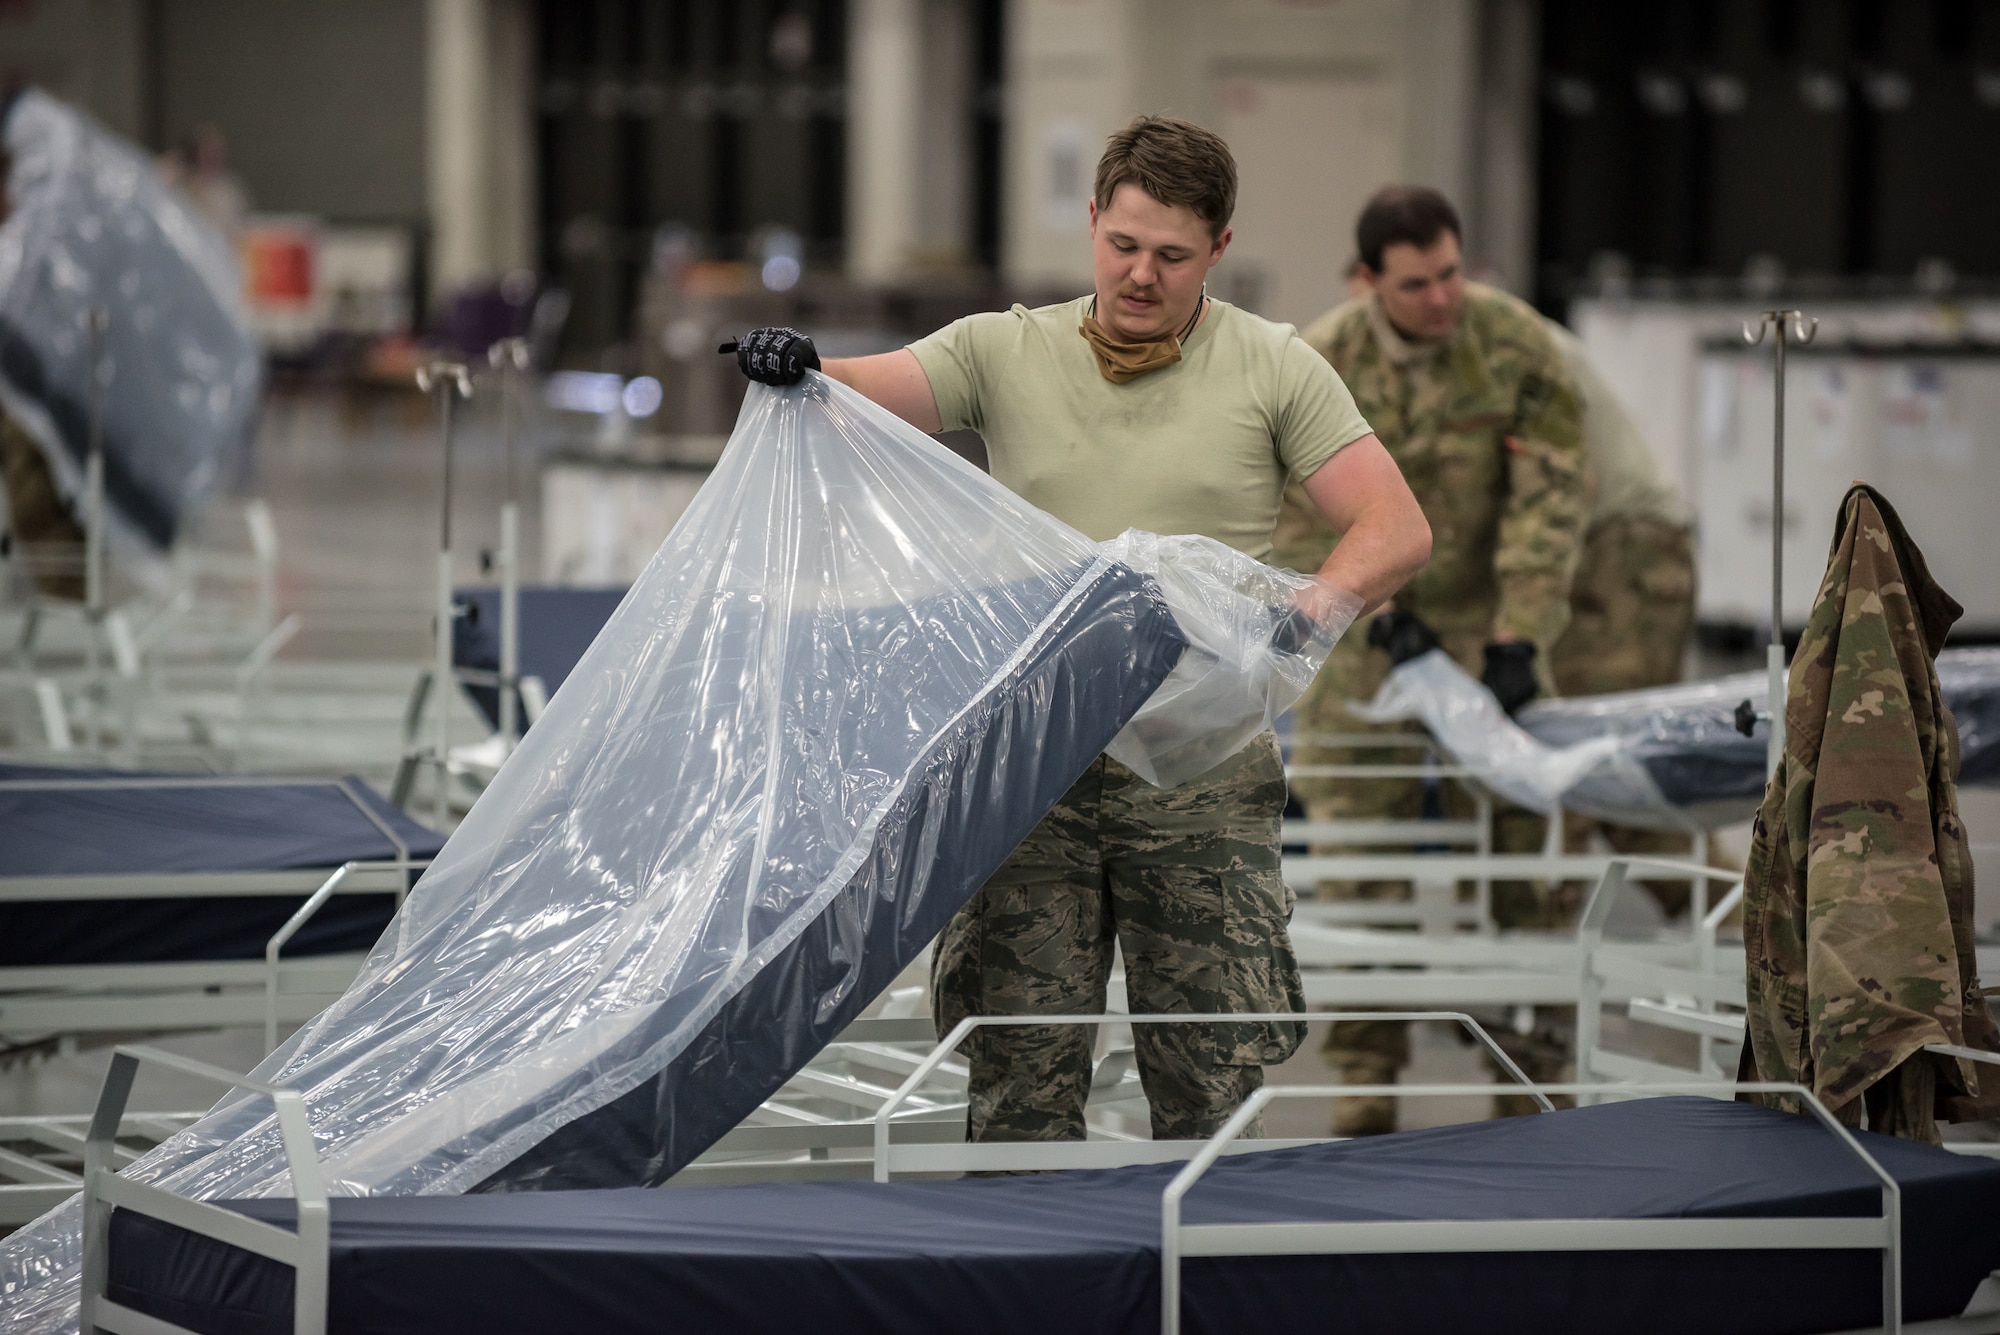 Airman 1st Class Steve Shaffer of the Kentucky Air National Guard's 123rd Airlift Wing places a mattress on a hospital bed at the Kentucky Fair and Exposition Center in Louisville, Ky., April 11, 2020. The site, which is expected to be operational April 15, will serve as an Alternate Care Facility for patients suffering from COVID-19 if area hospitals exceed available capacity. The location initially can treat up to 288 patients and is scalable to 2,000 beds. (U.S. Air National Guard photo by Dale Greer)